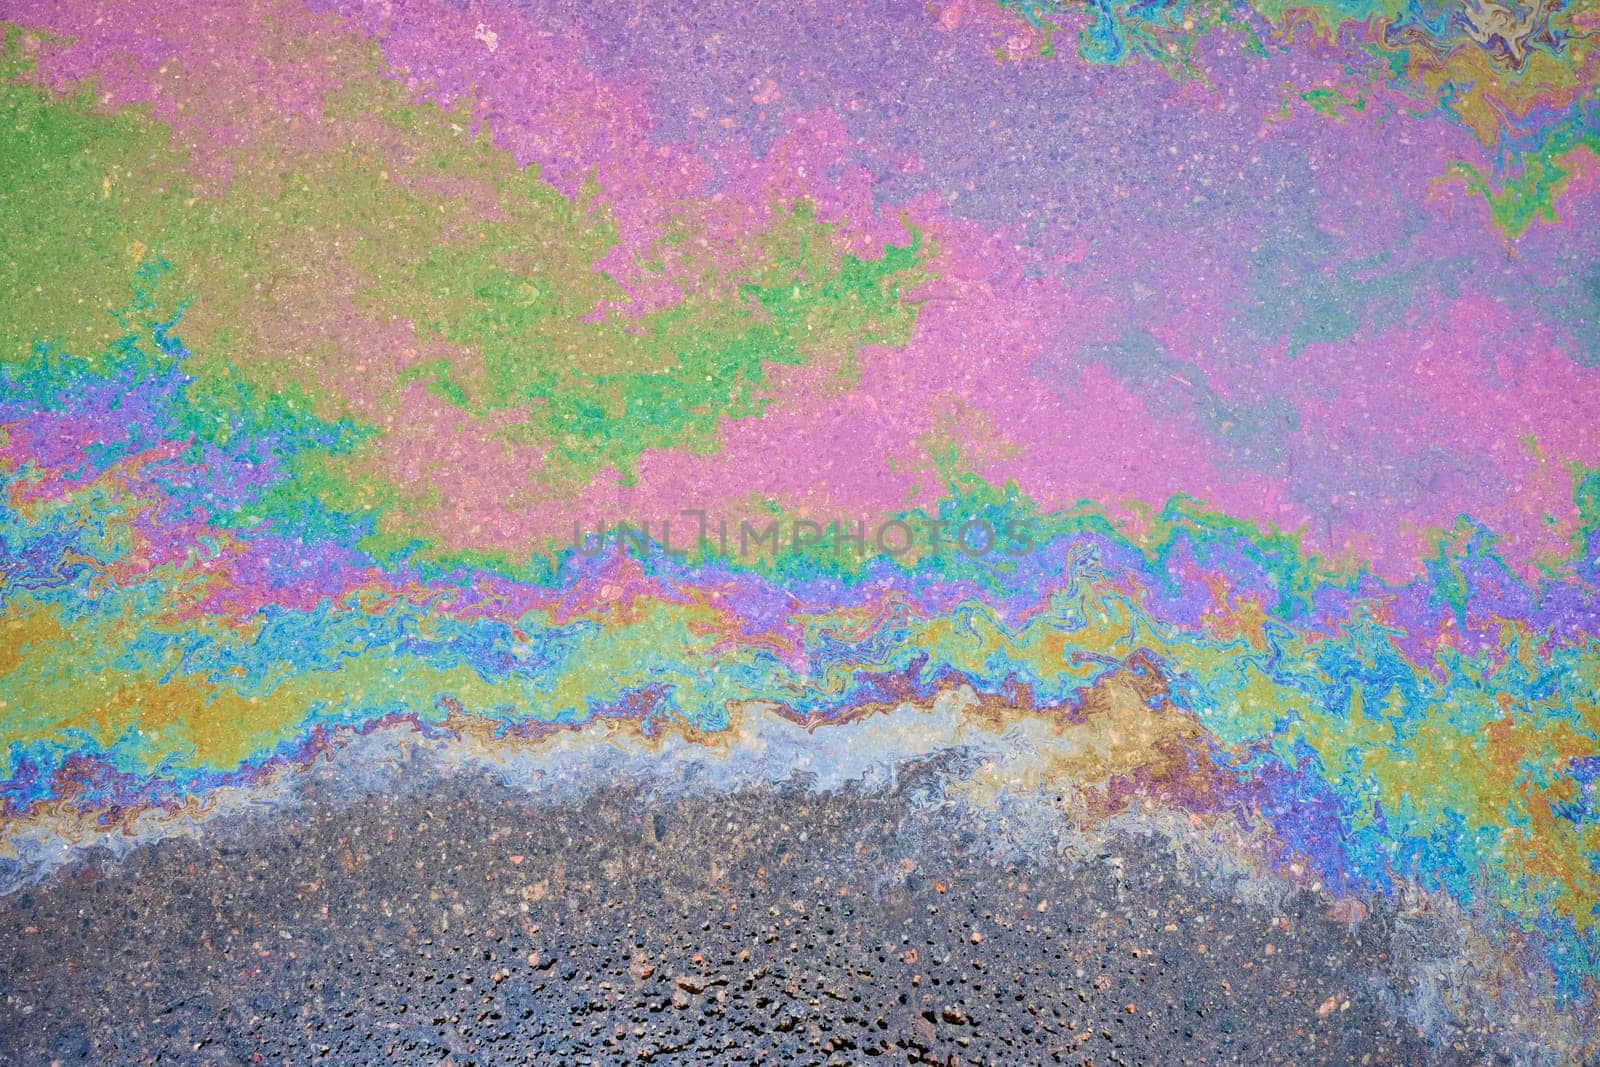 Oil stains from leaks in the car engine. Oil after rain makes spots with rainbow reflections refractive sun spectrum. by AliaksandrFilimonau